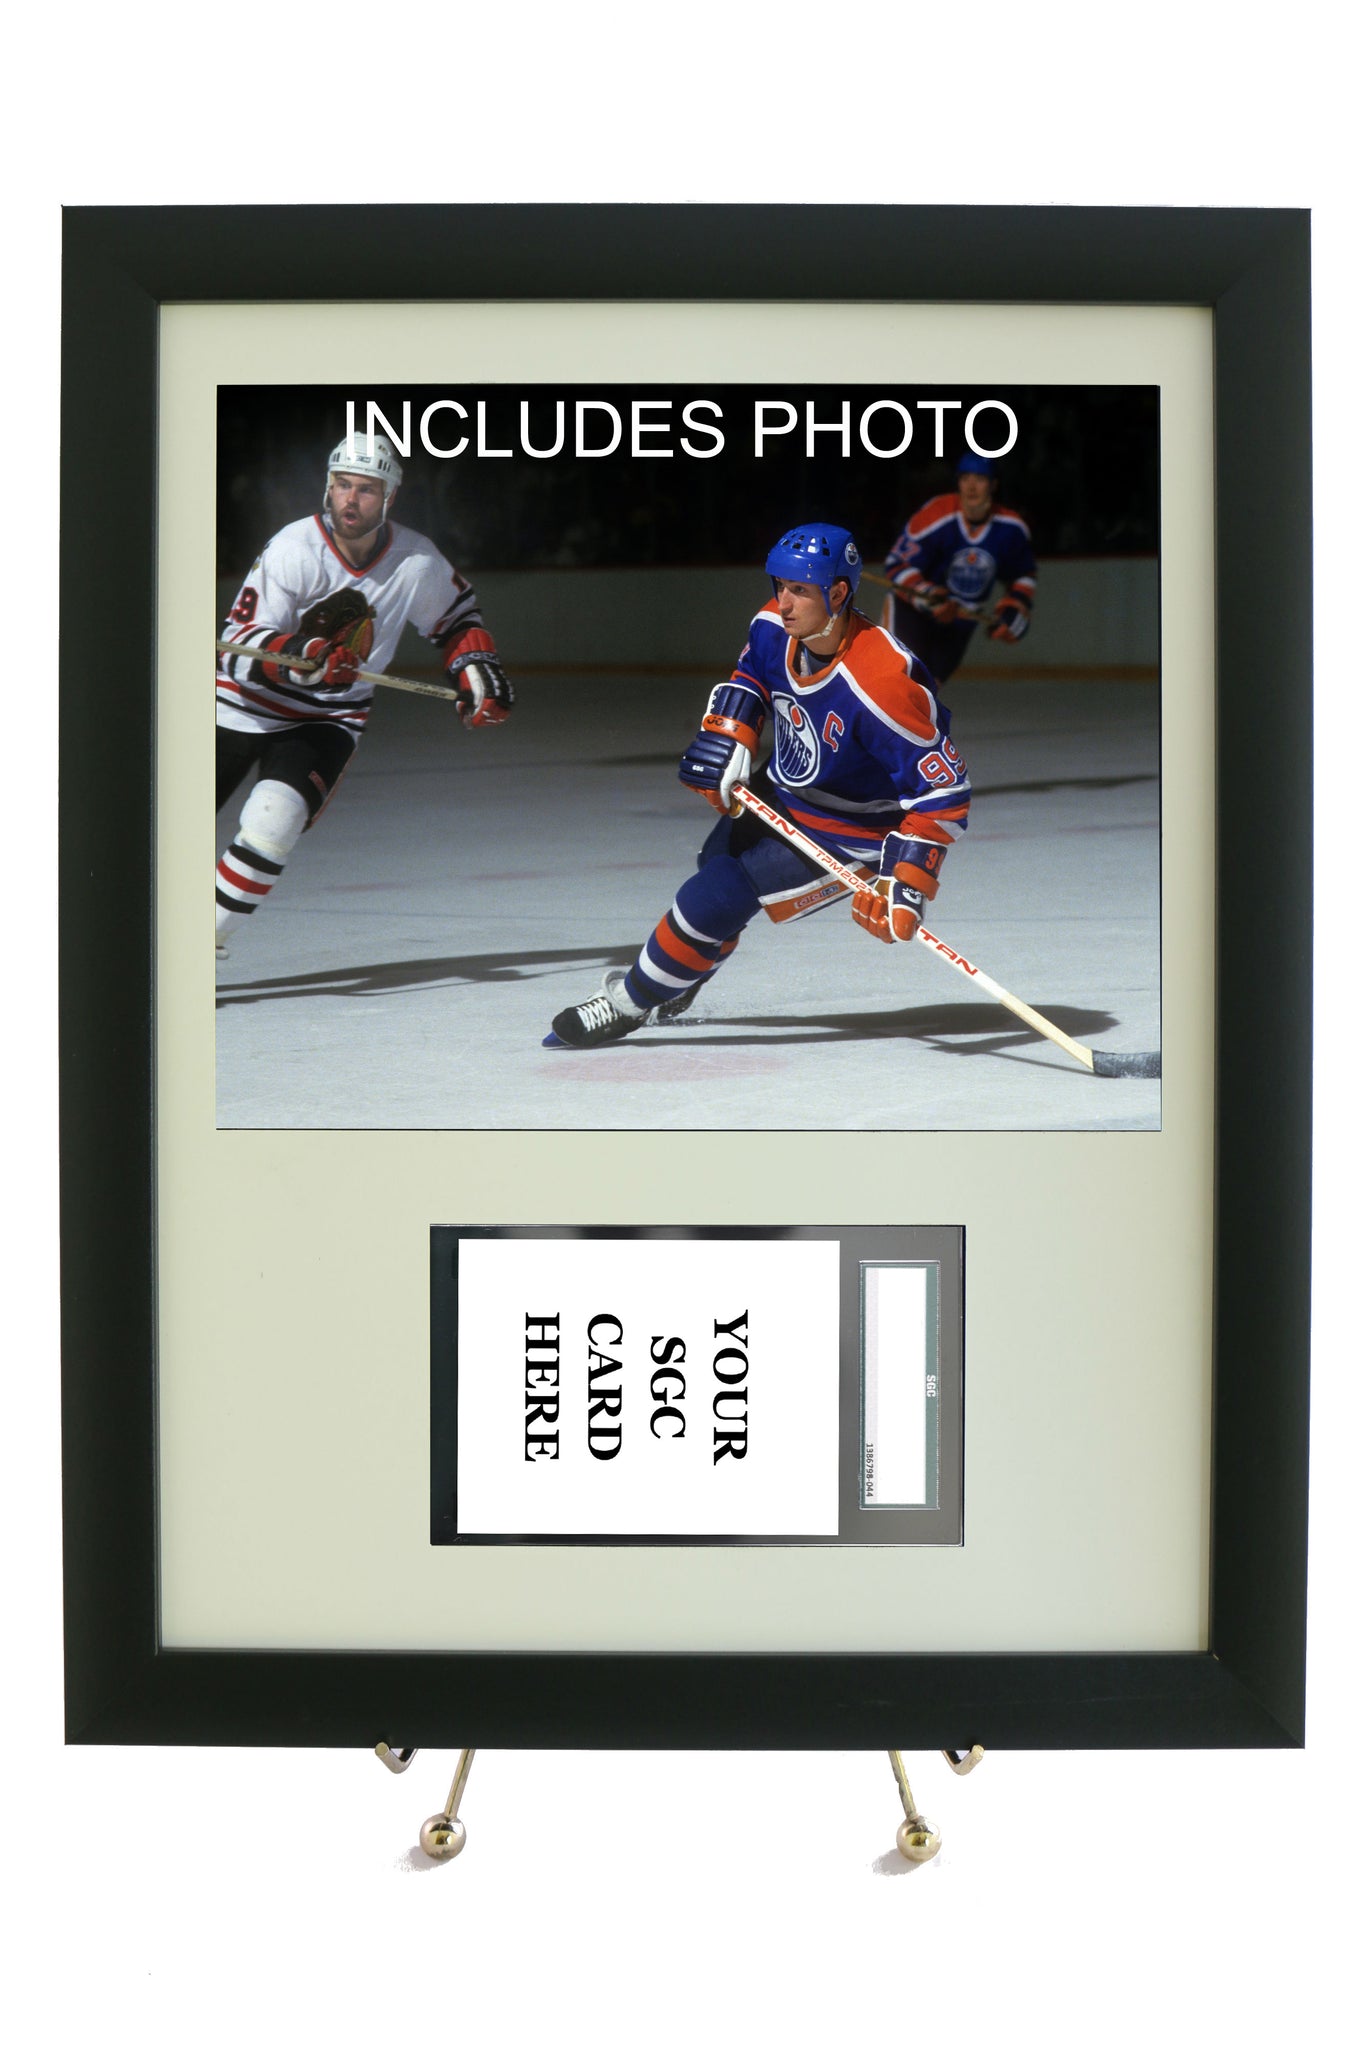 Graded Sports Card Frame for YOUR Wayne Gretzky Horizontal SGC Card (INCLUDES PHOTO) - Graded And Framed